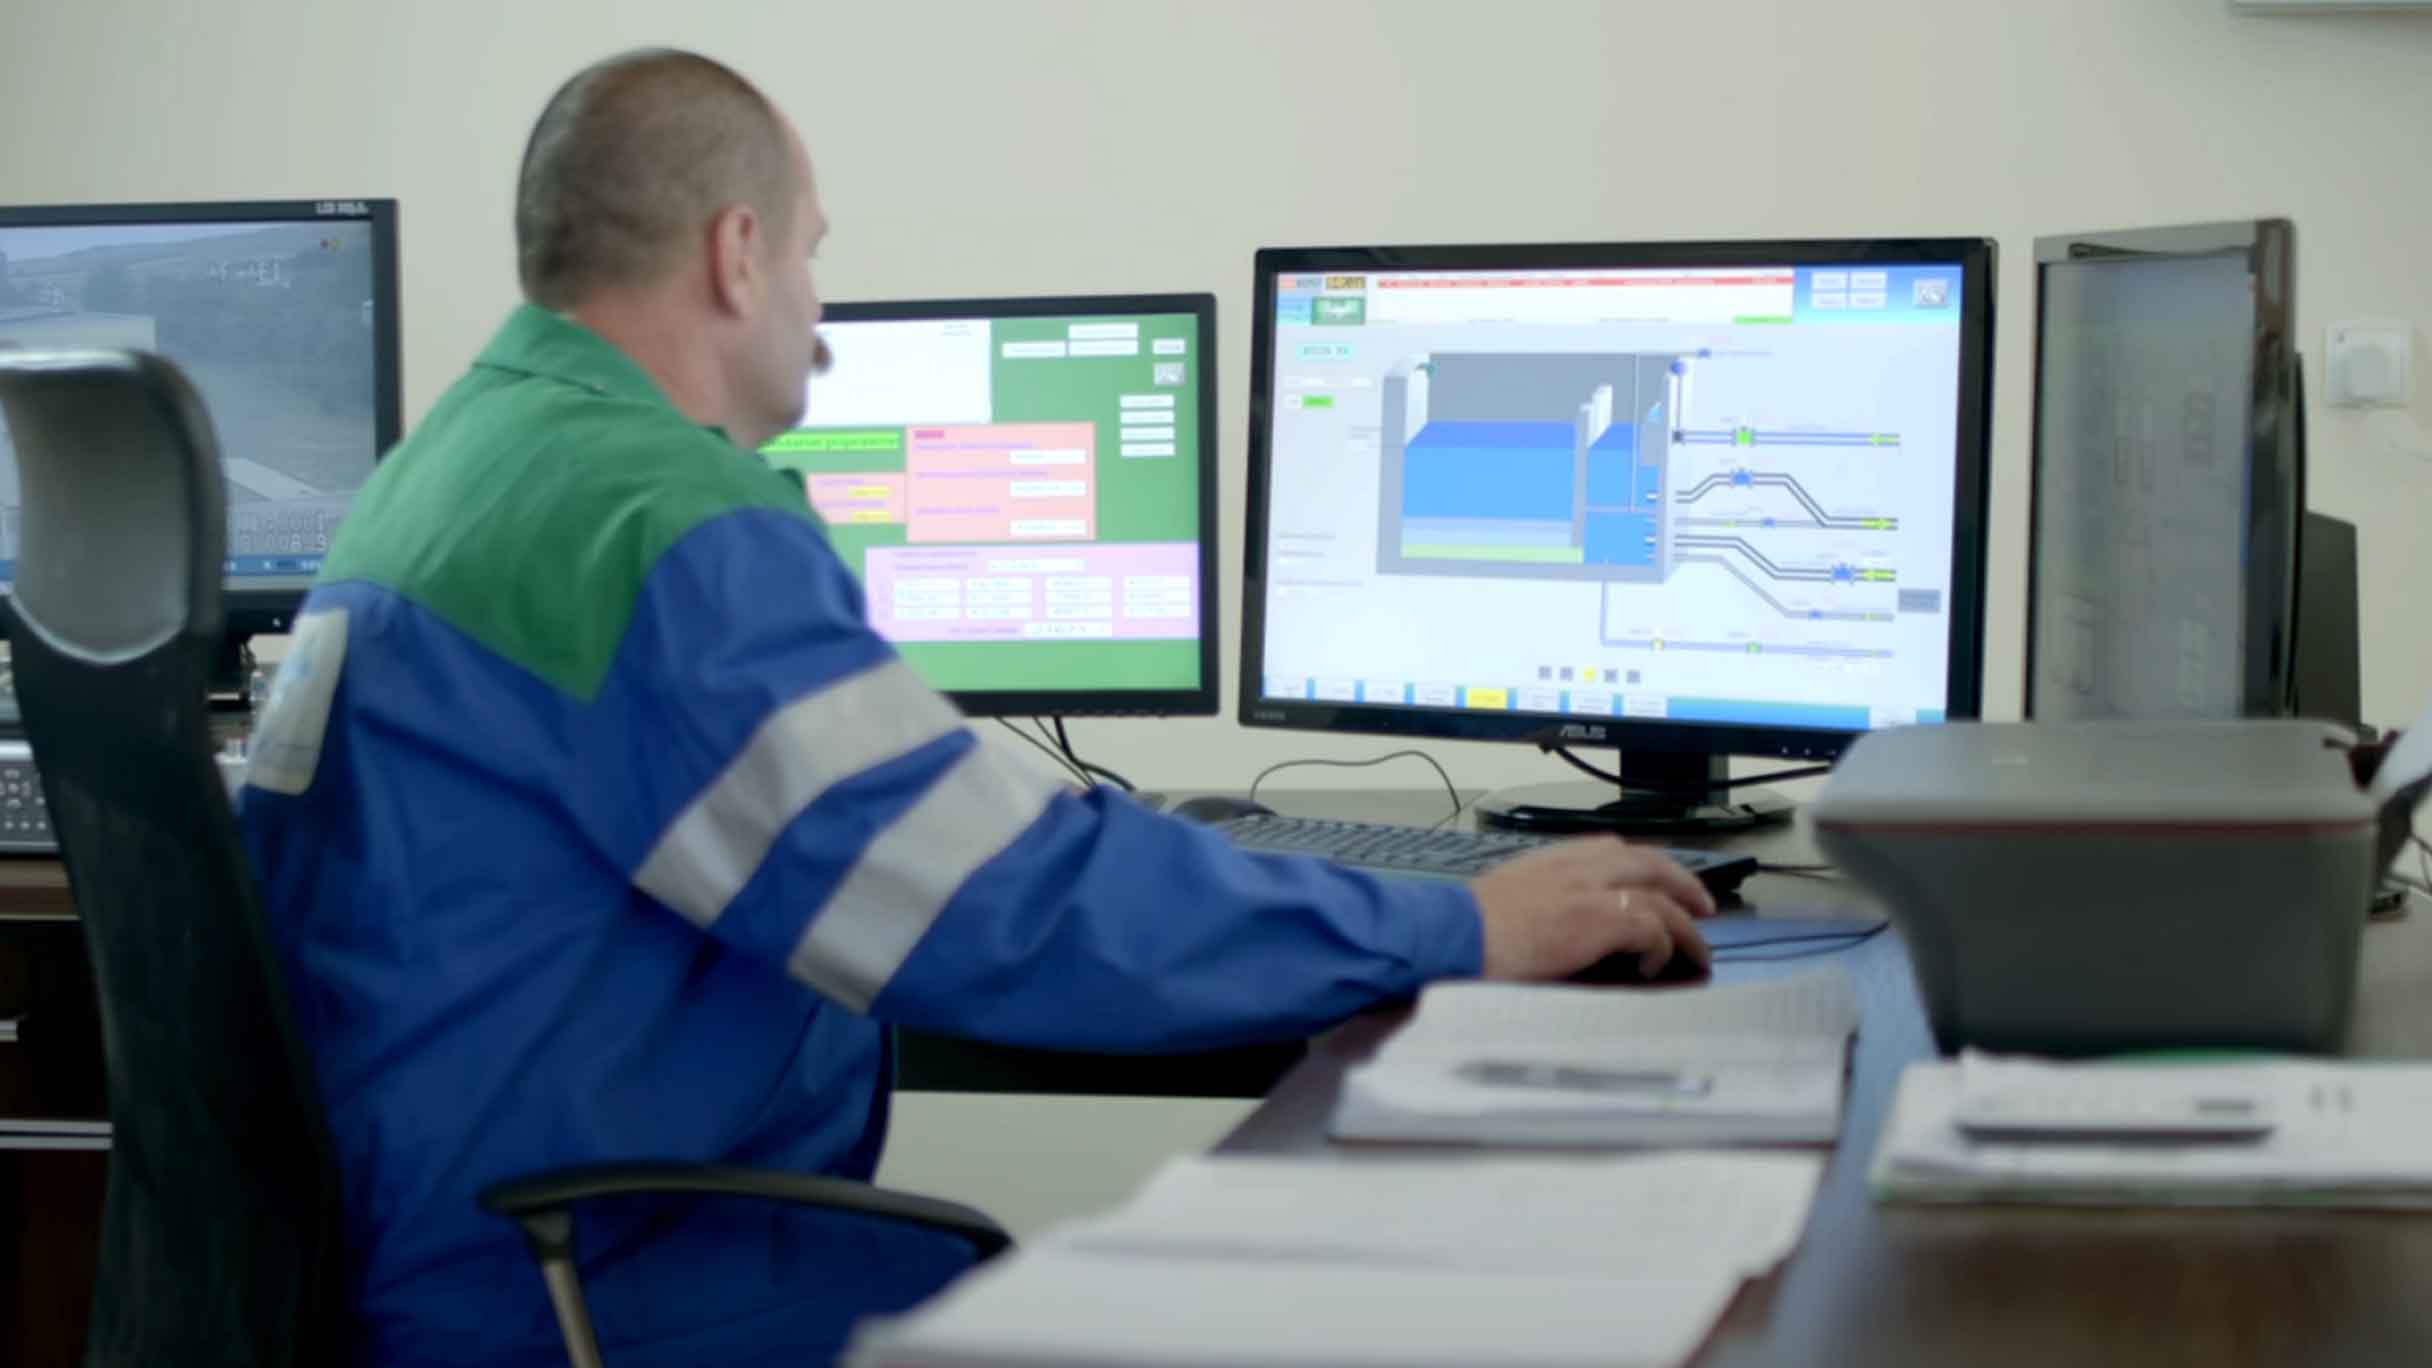 MPGK Krosno improves water utility reliability with Proficy software